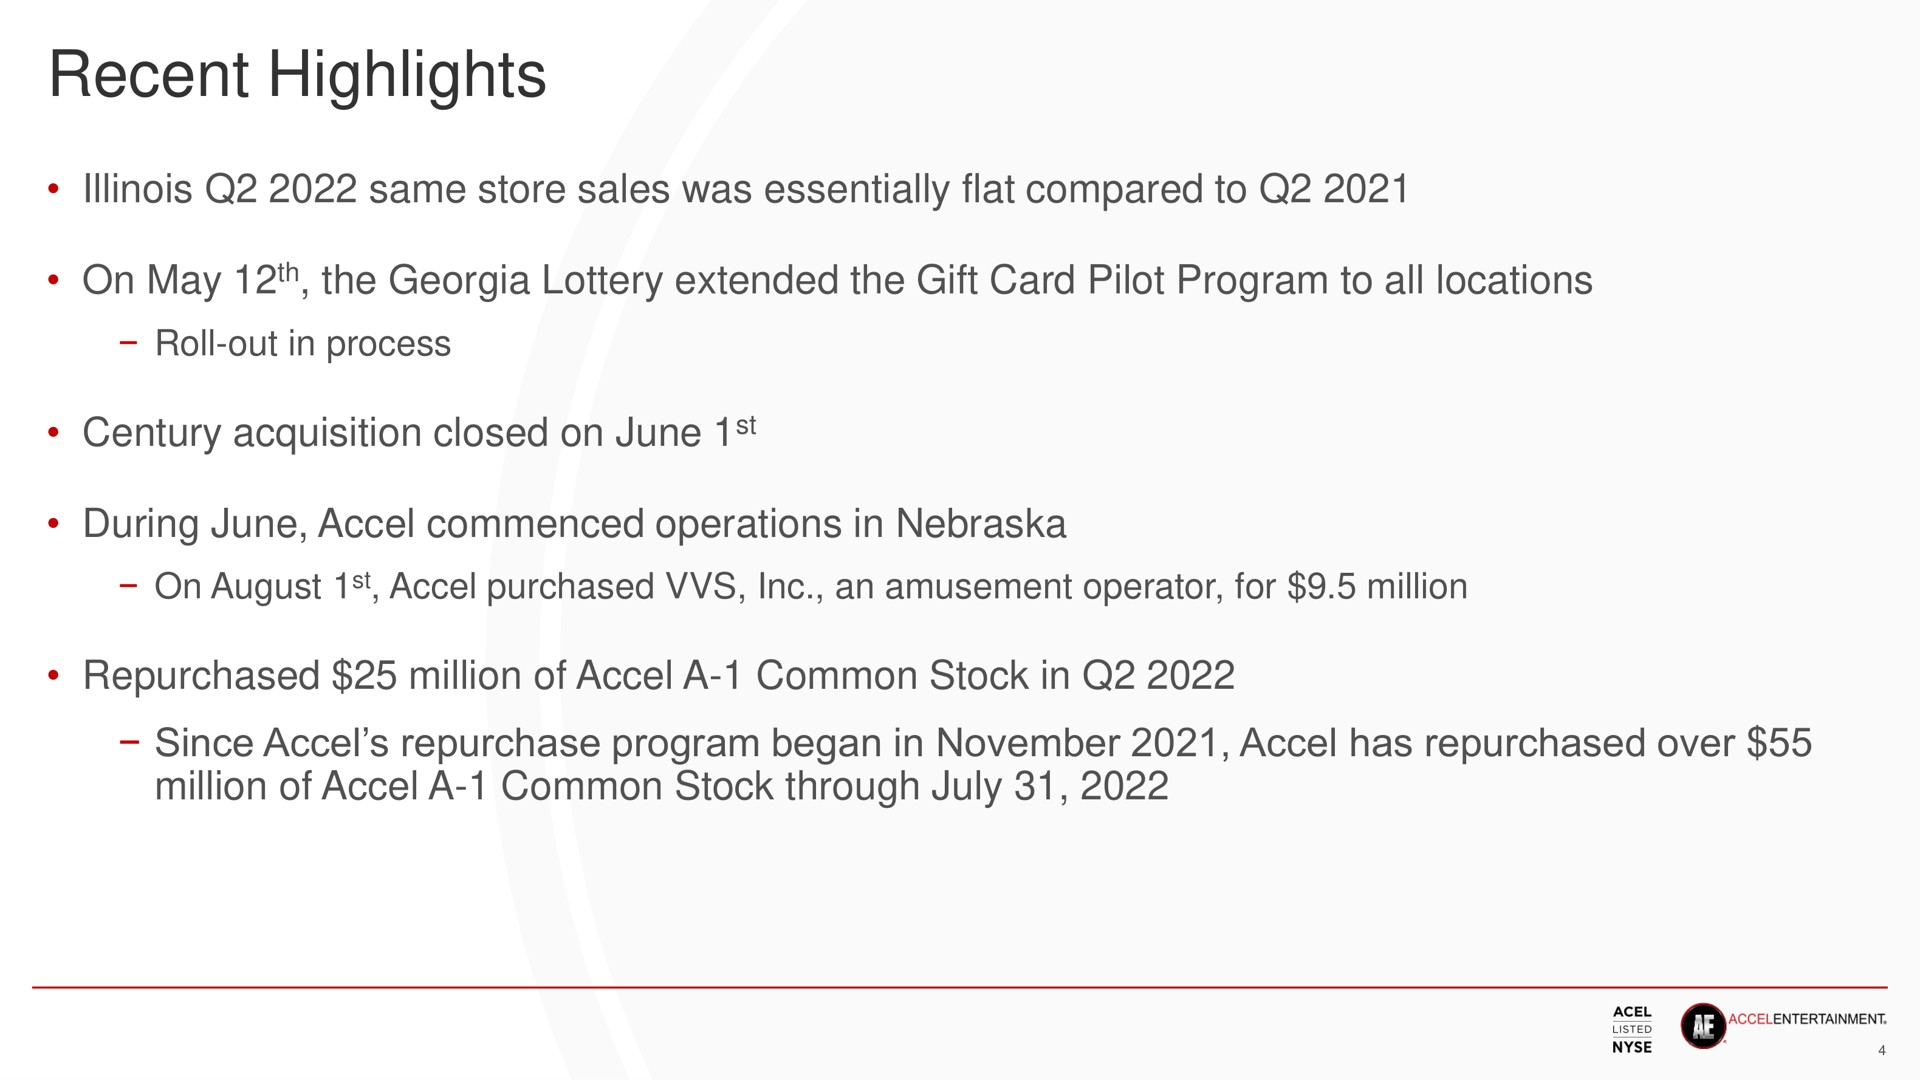 recent highlights same store sales was essentially flat compared to on may the lottery extended the gift card pilot program to all locations roll out in process century acquisition closed on june during june commenced operations in on august purchased an amusement operator for million repurchased million of a common stock in since repurchase program began in has repurchased over million of a common stock through | Accel Entertaiment